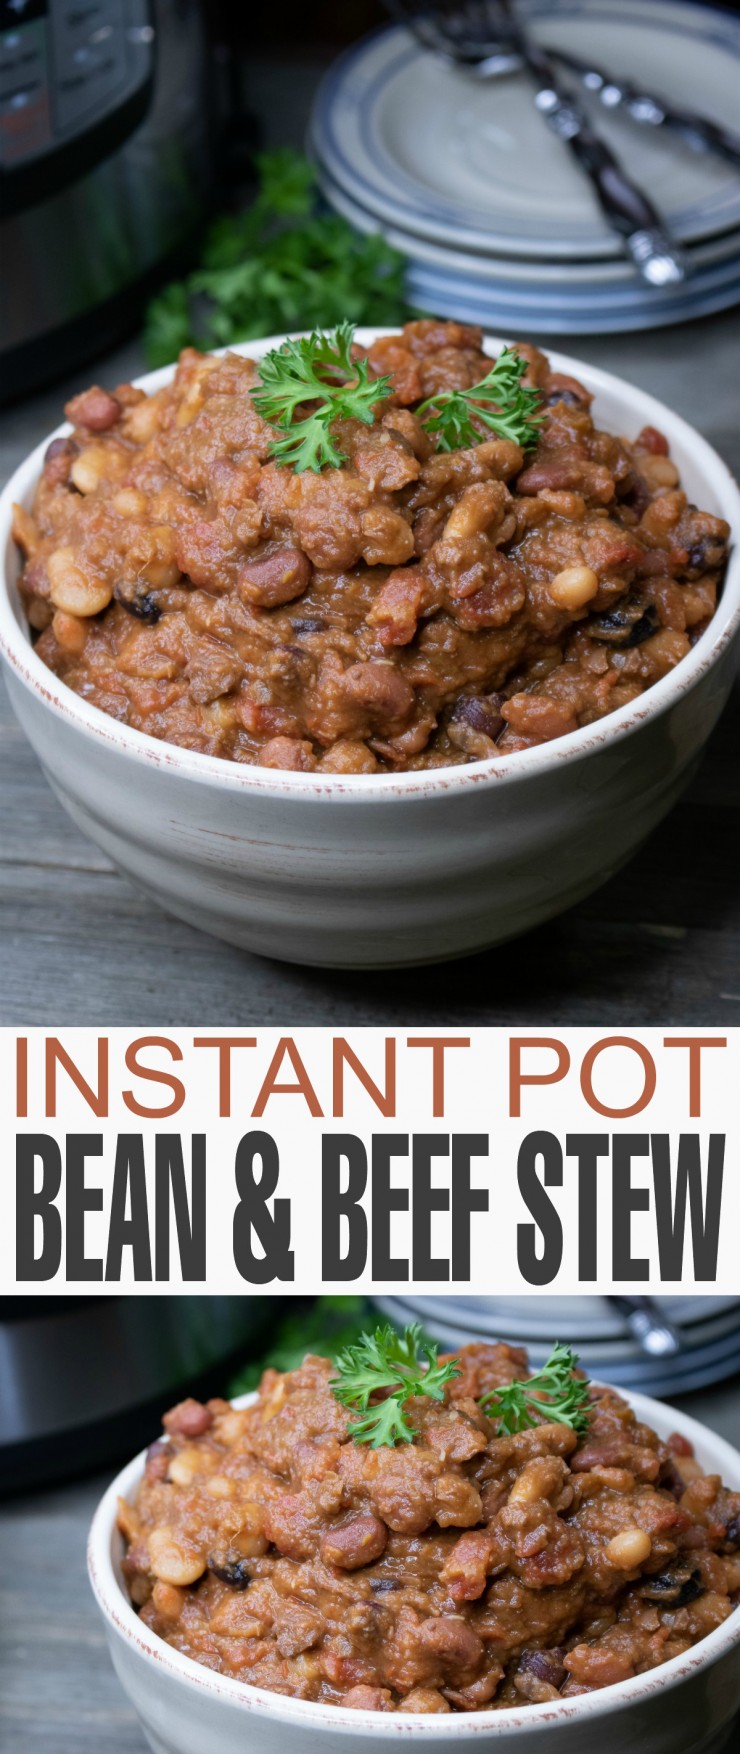 Delicious, healthy, easy and packed full of protein, this Instant Pot recipe for Bean Stew with Beef is sure to be a hit with your family.